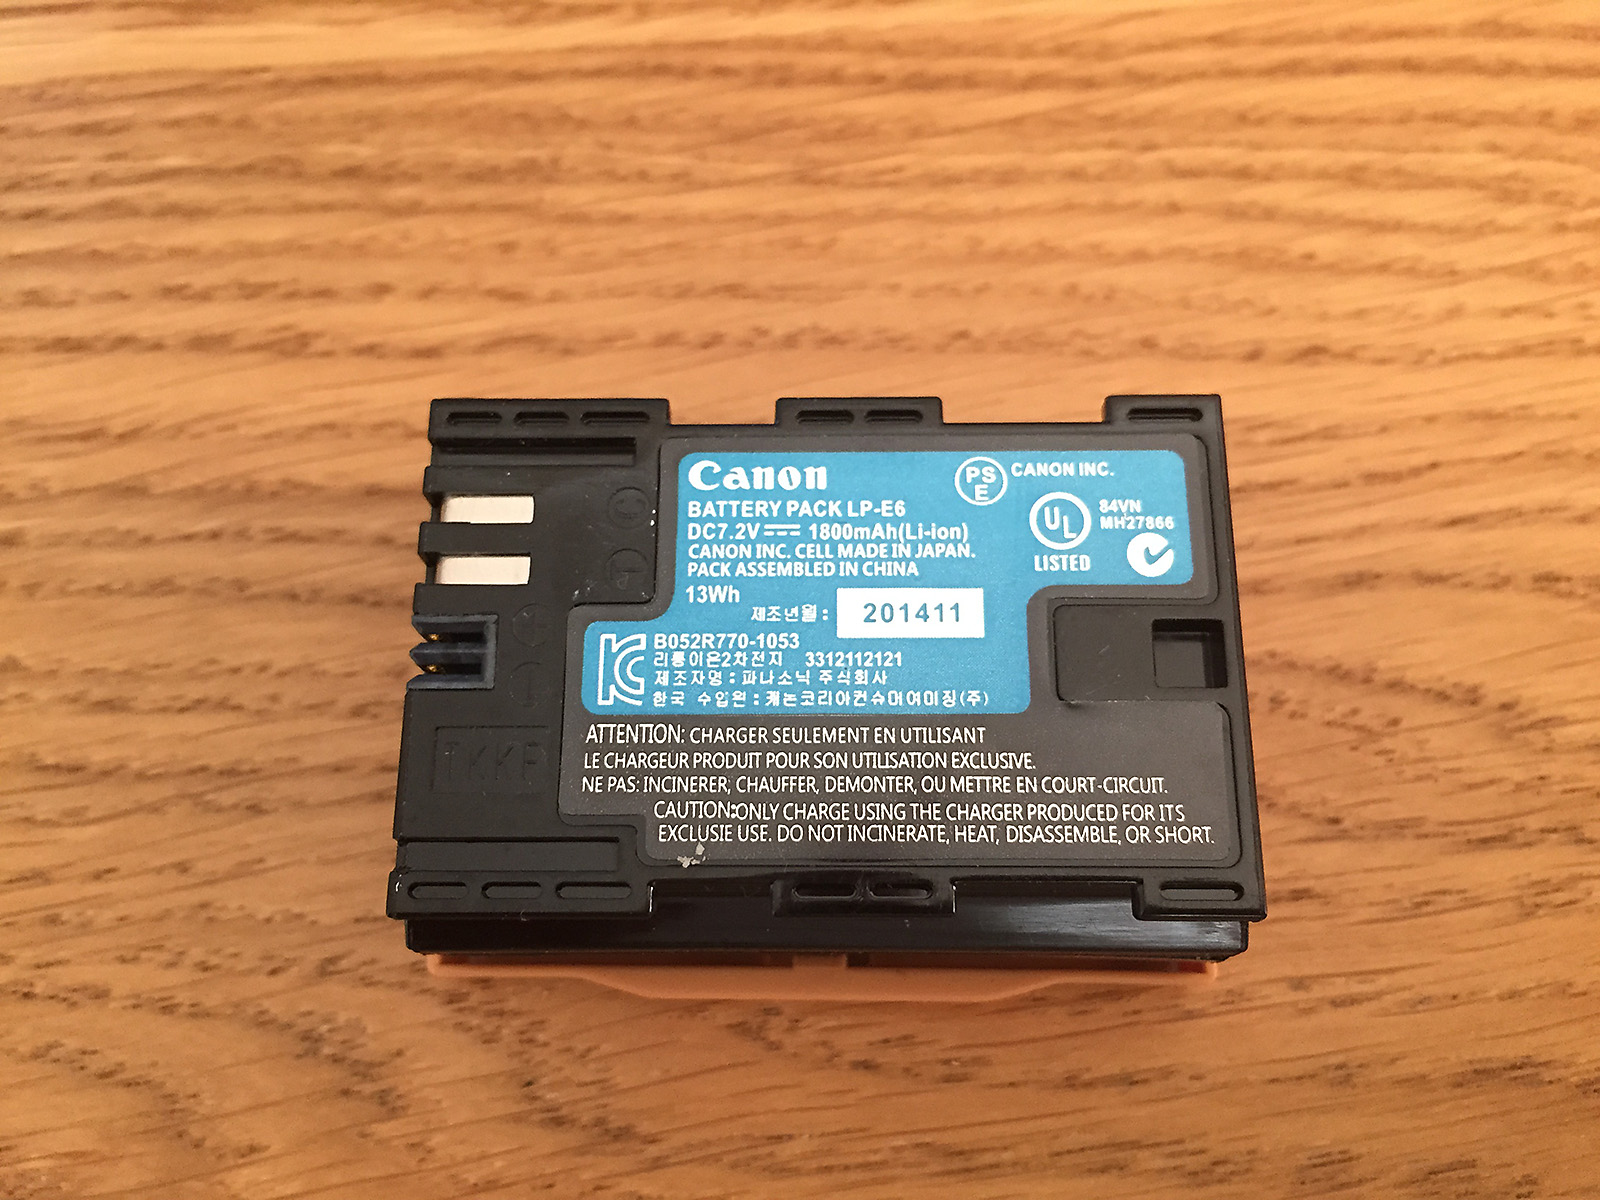 Can you spot why this Canon battery pack is not the real thing...?